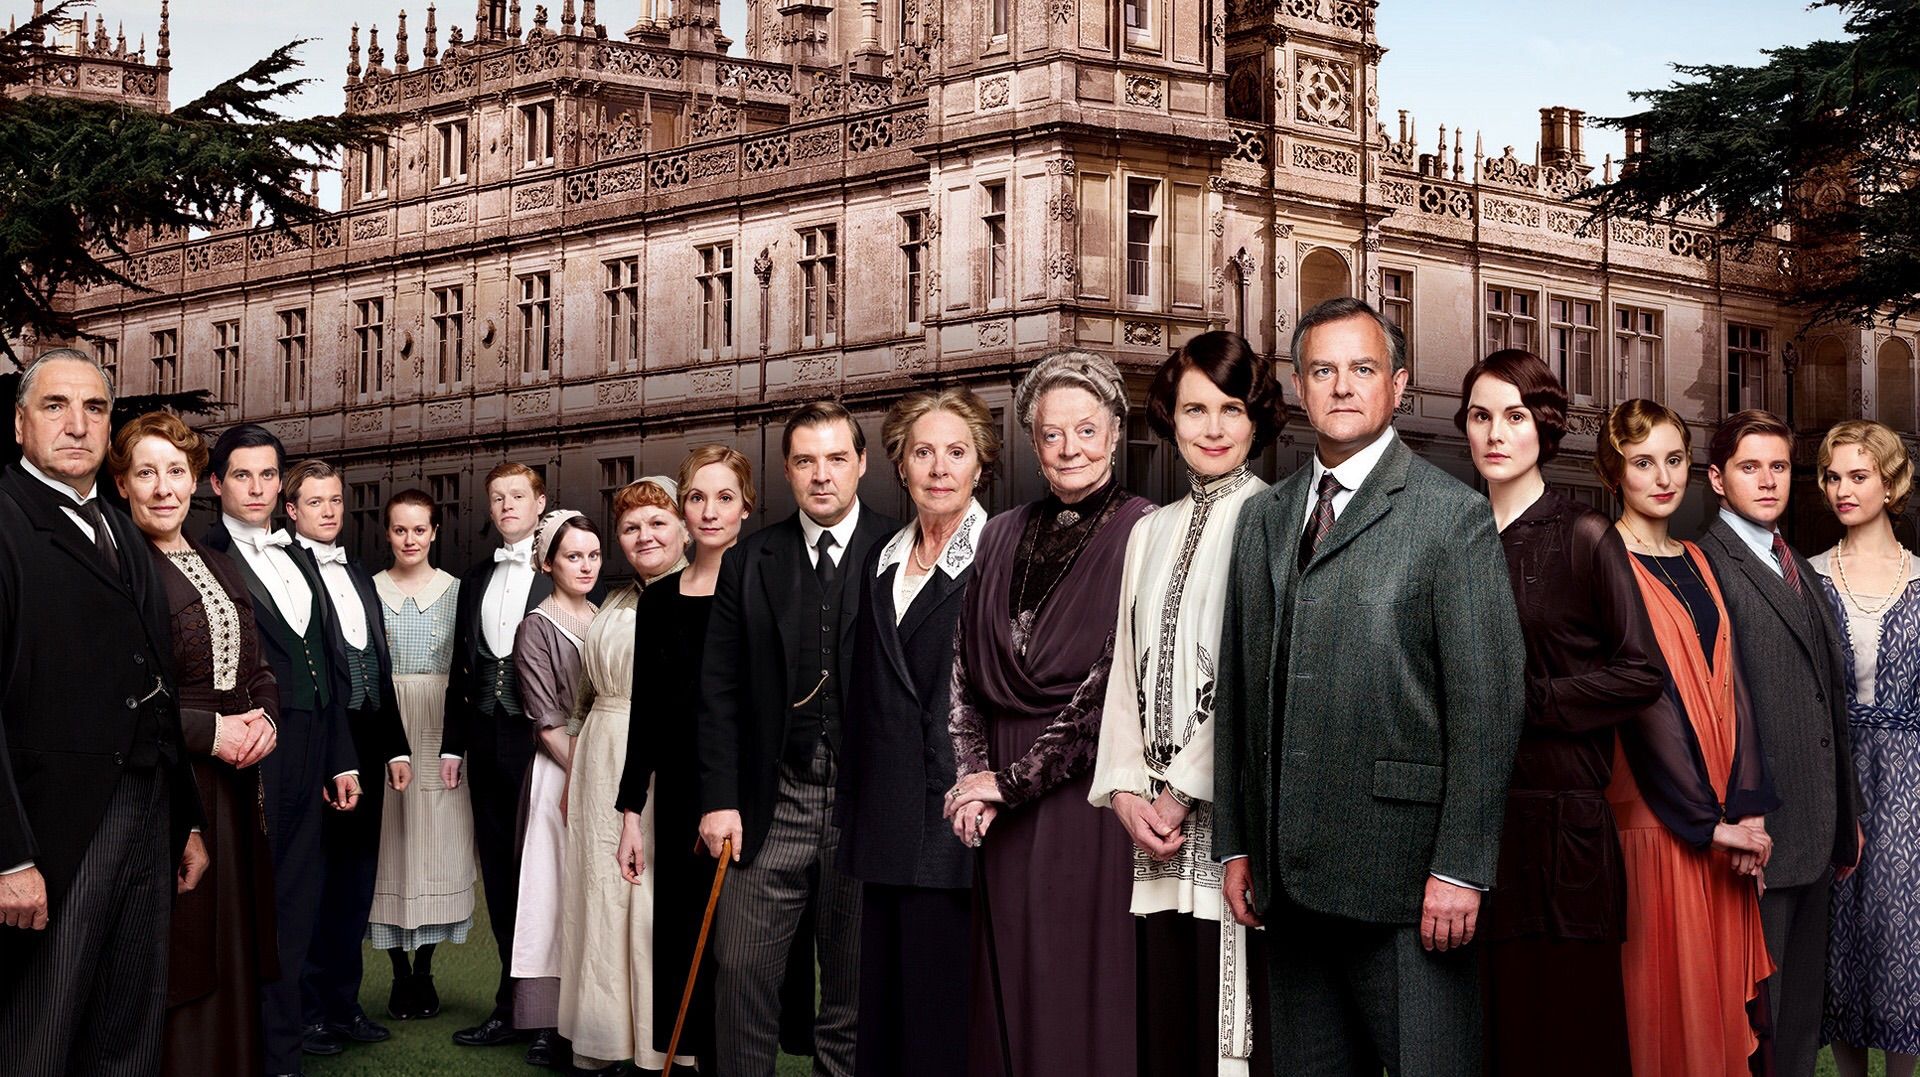 &#039;Downtown Abbey&#039; Producers Considering Movie or Other Spin-Off Possibilities